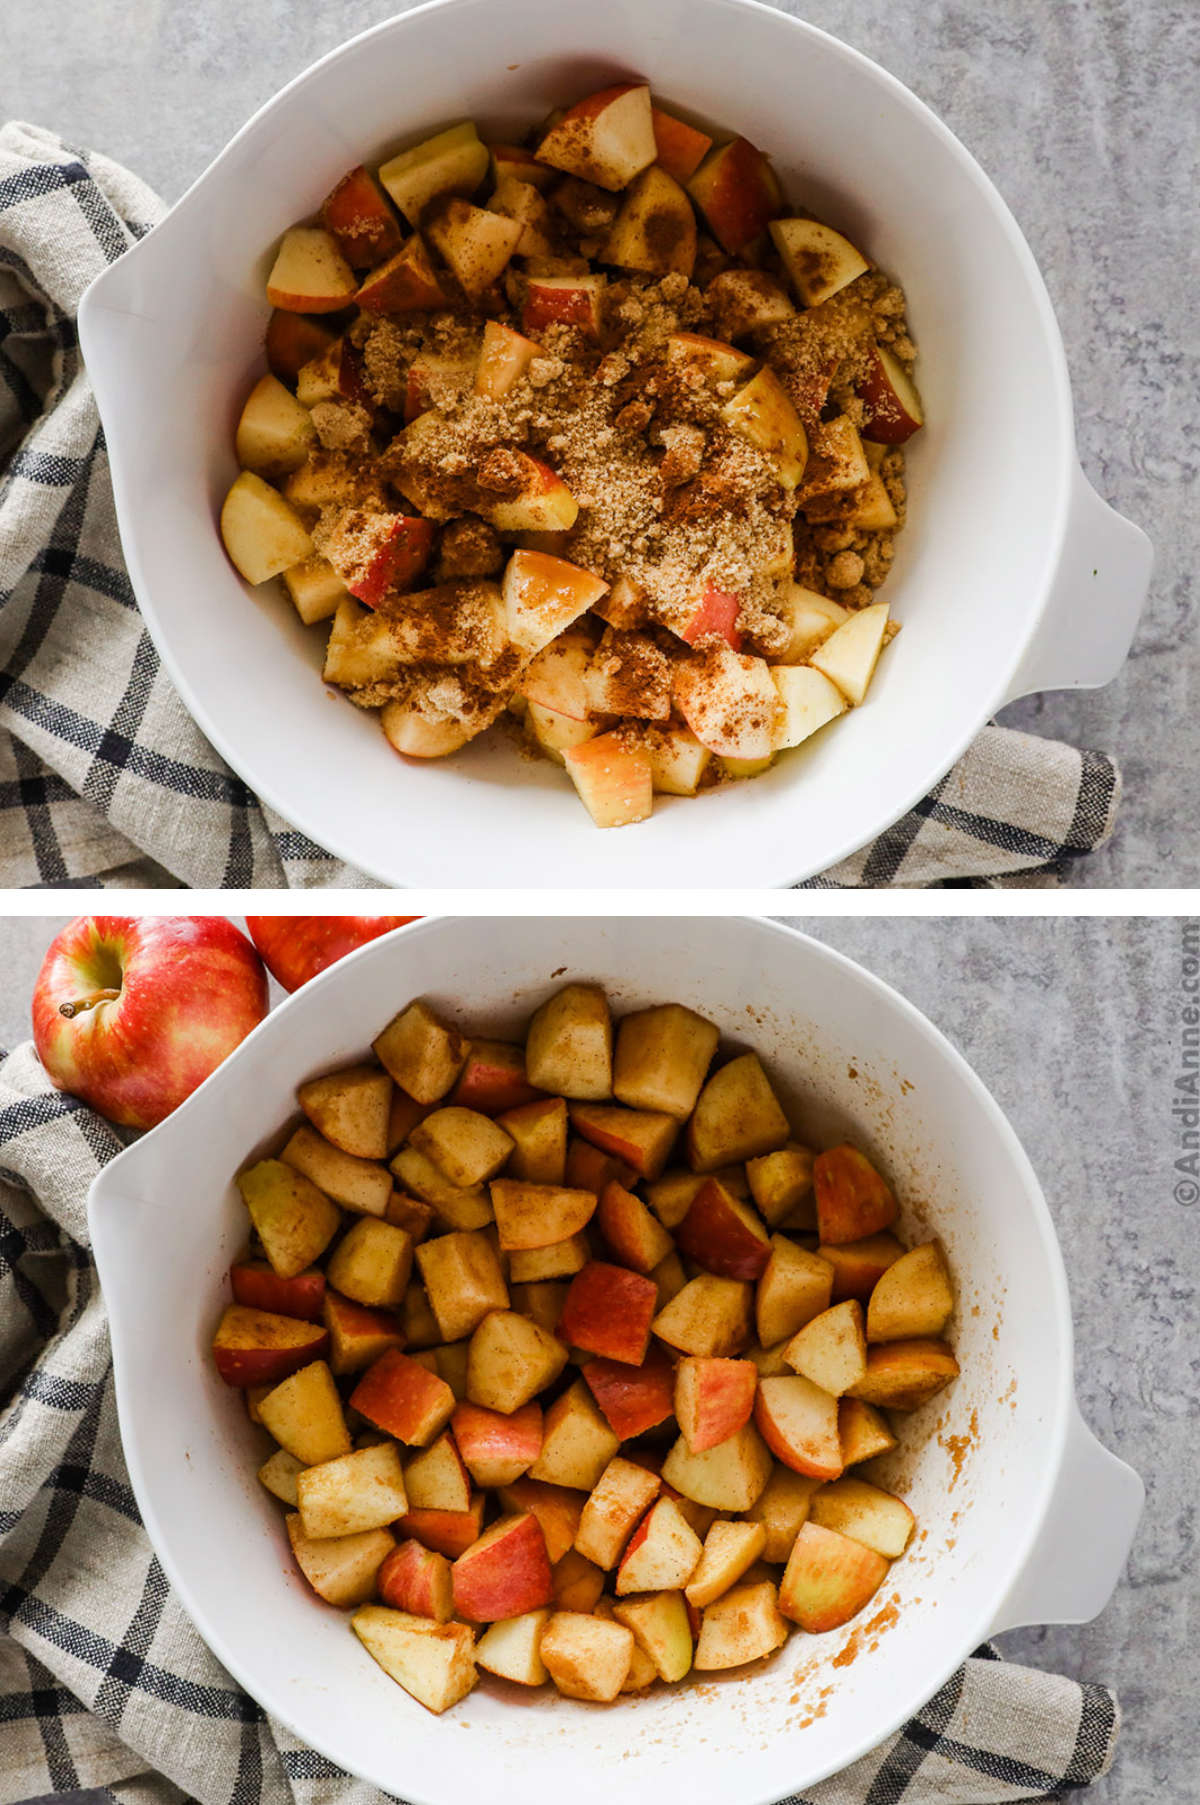 Two overhead images in one: 1. Apple chunks are pin a white bowl with sugar, cinnamon and vanilla extract. 2. Apples are tossed with ingredients and evenly mixed. 